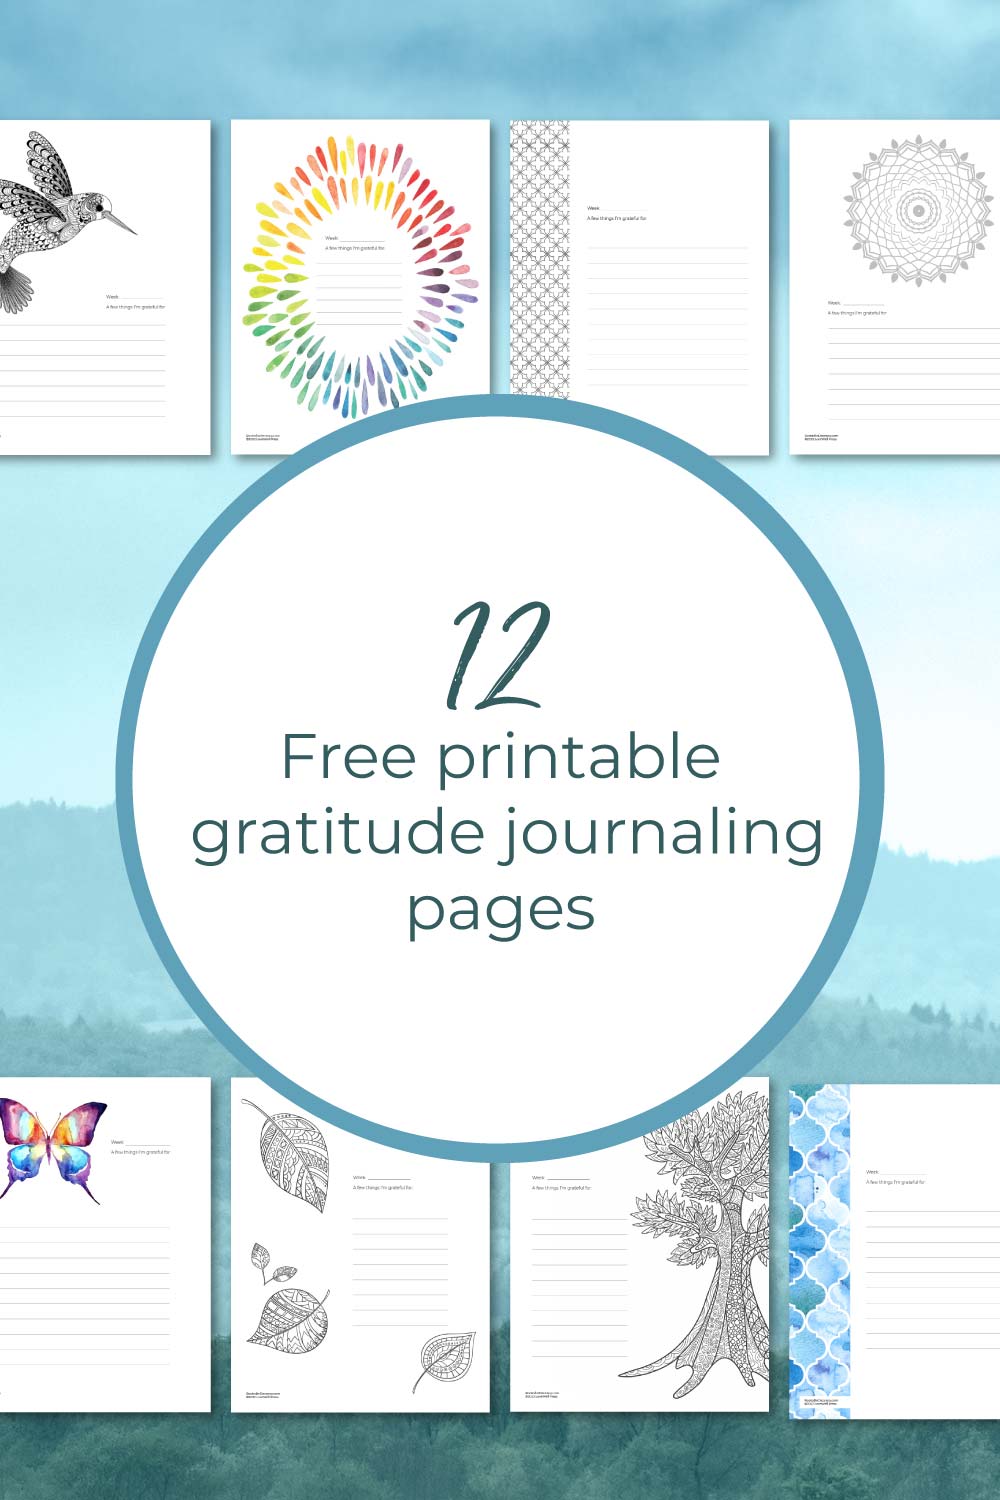 Gratitude journaling boosts wellness- free printable pages